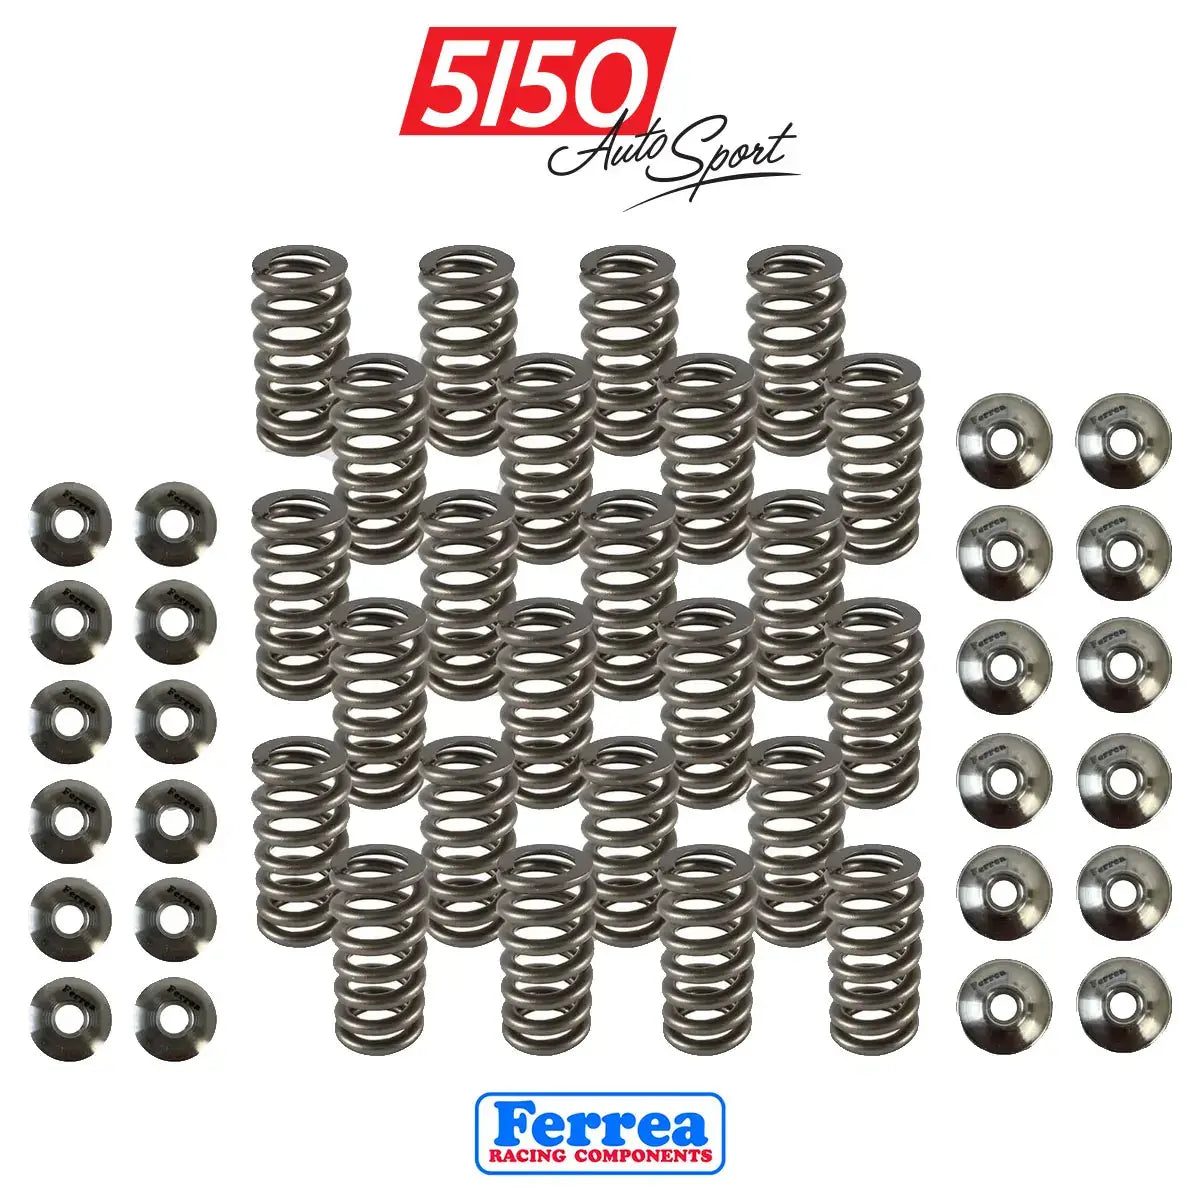 Ferrea Performance Racing Valve Spring Kit for BMW N55 and S55 Engines